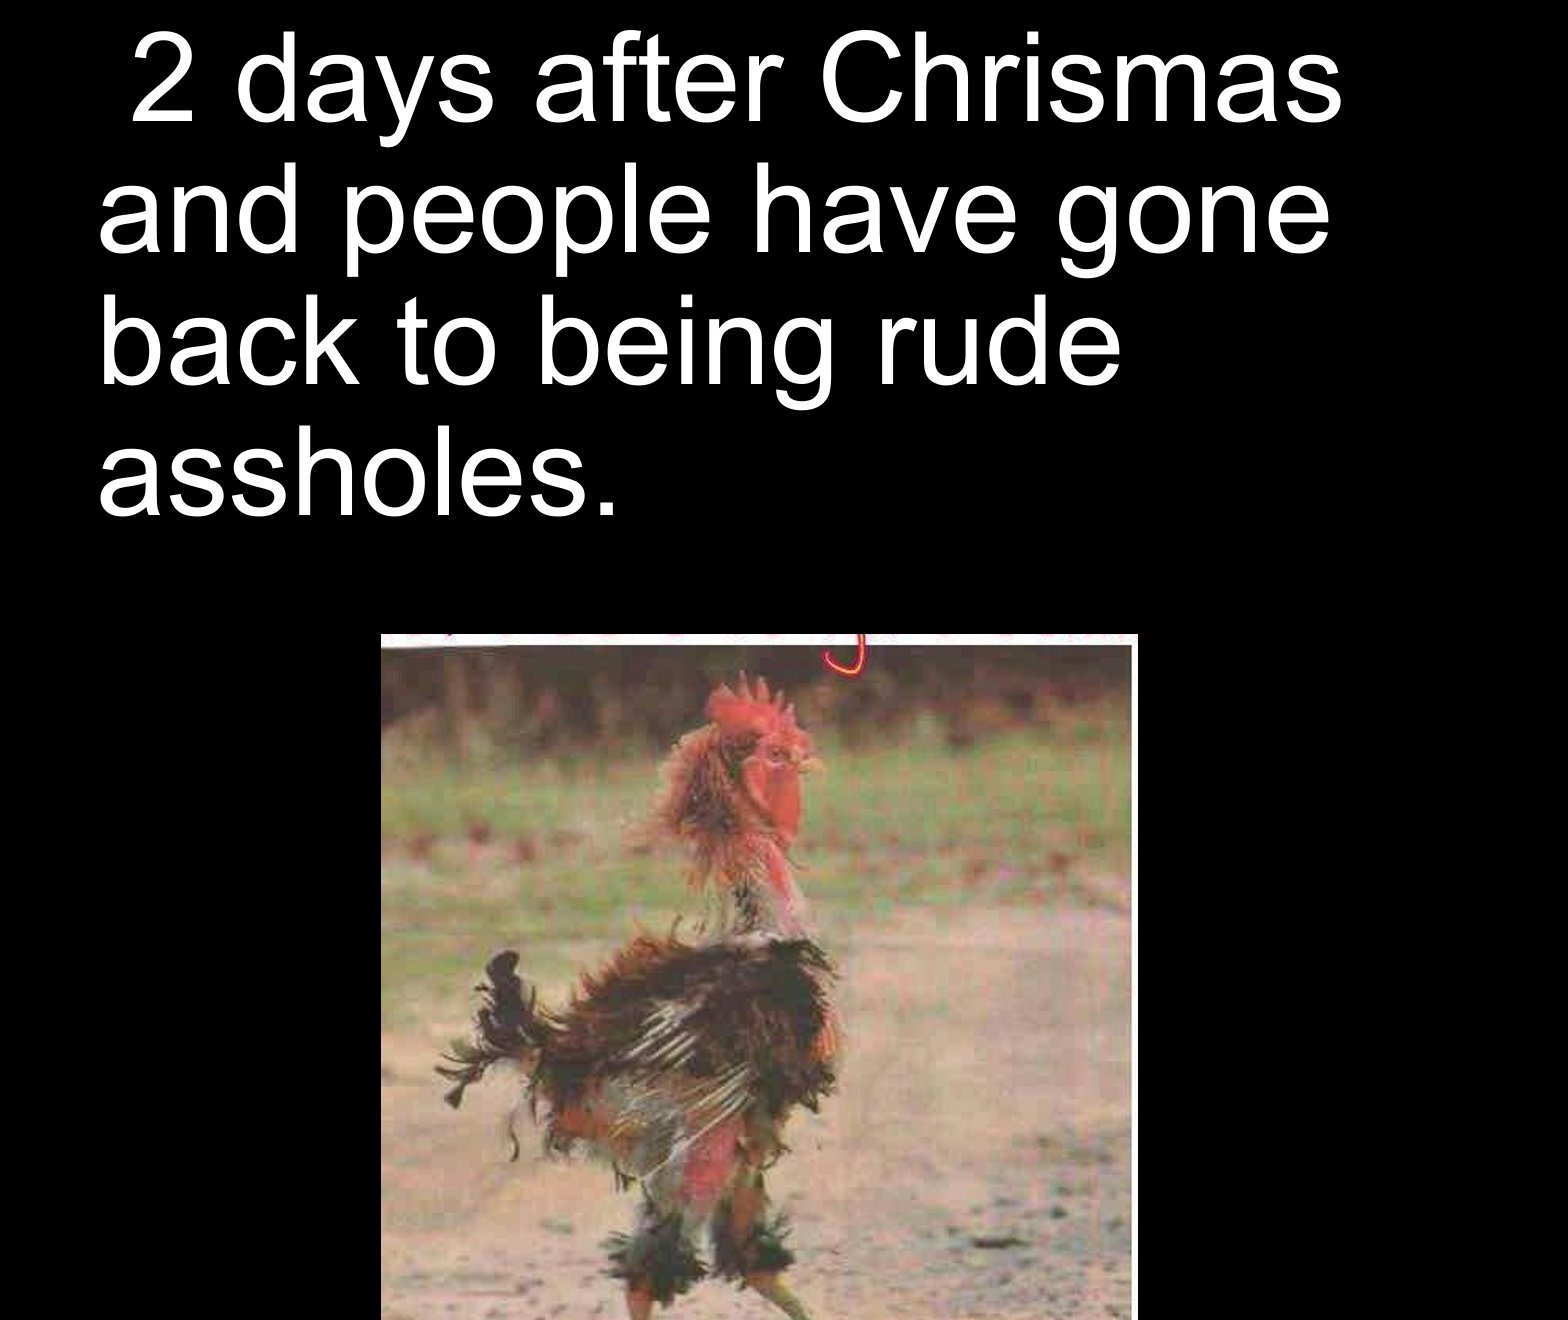 fauna - 2 days after Chrismas and people have gone back to being rude assholes.